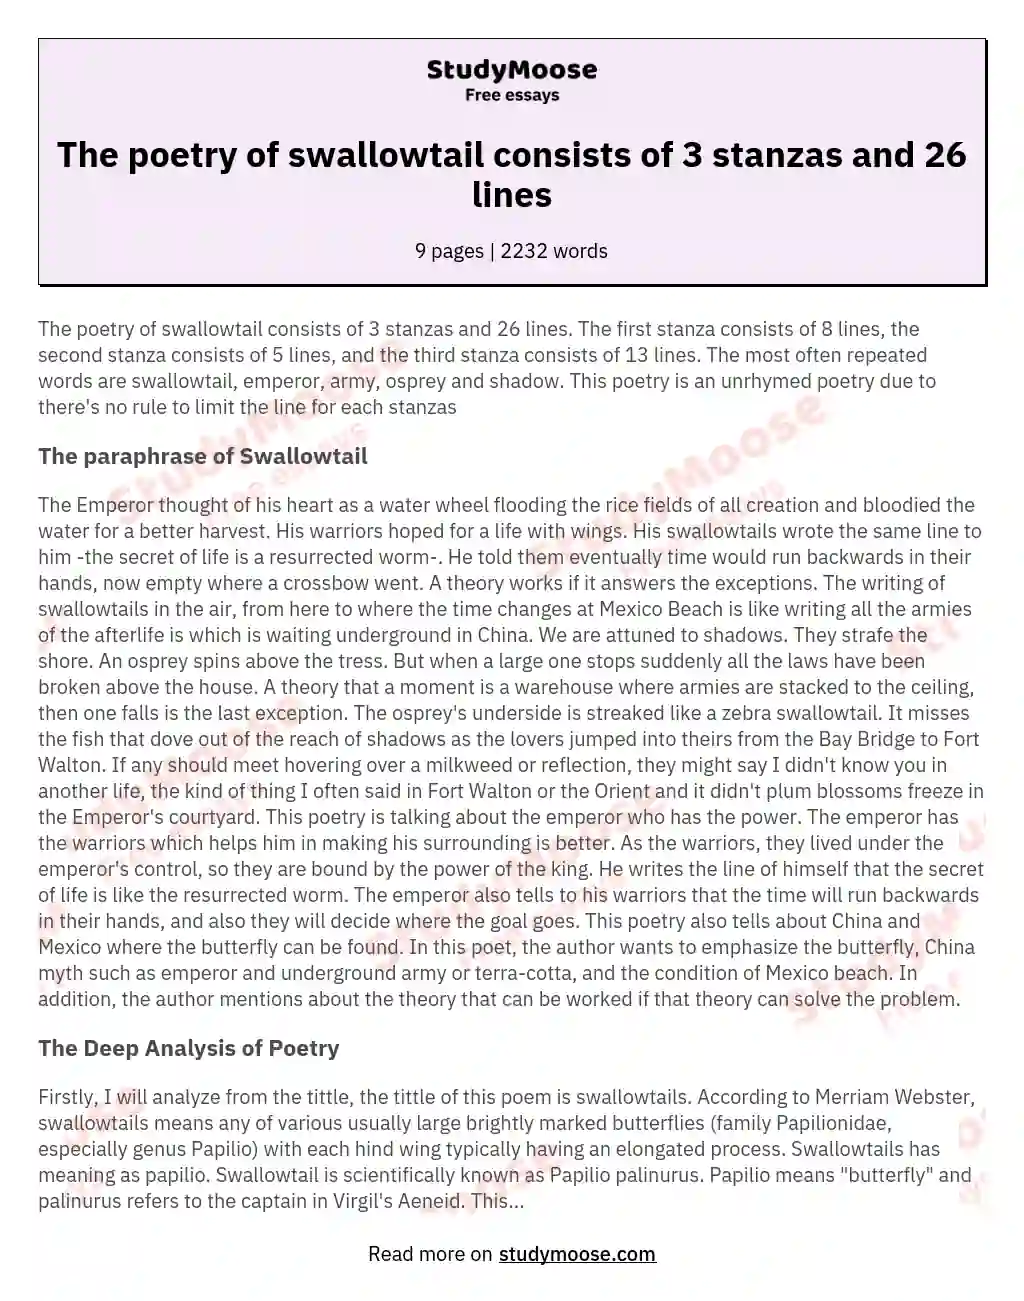 The poetry of swallowtail consists of 3 stanzas and 26 lines